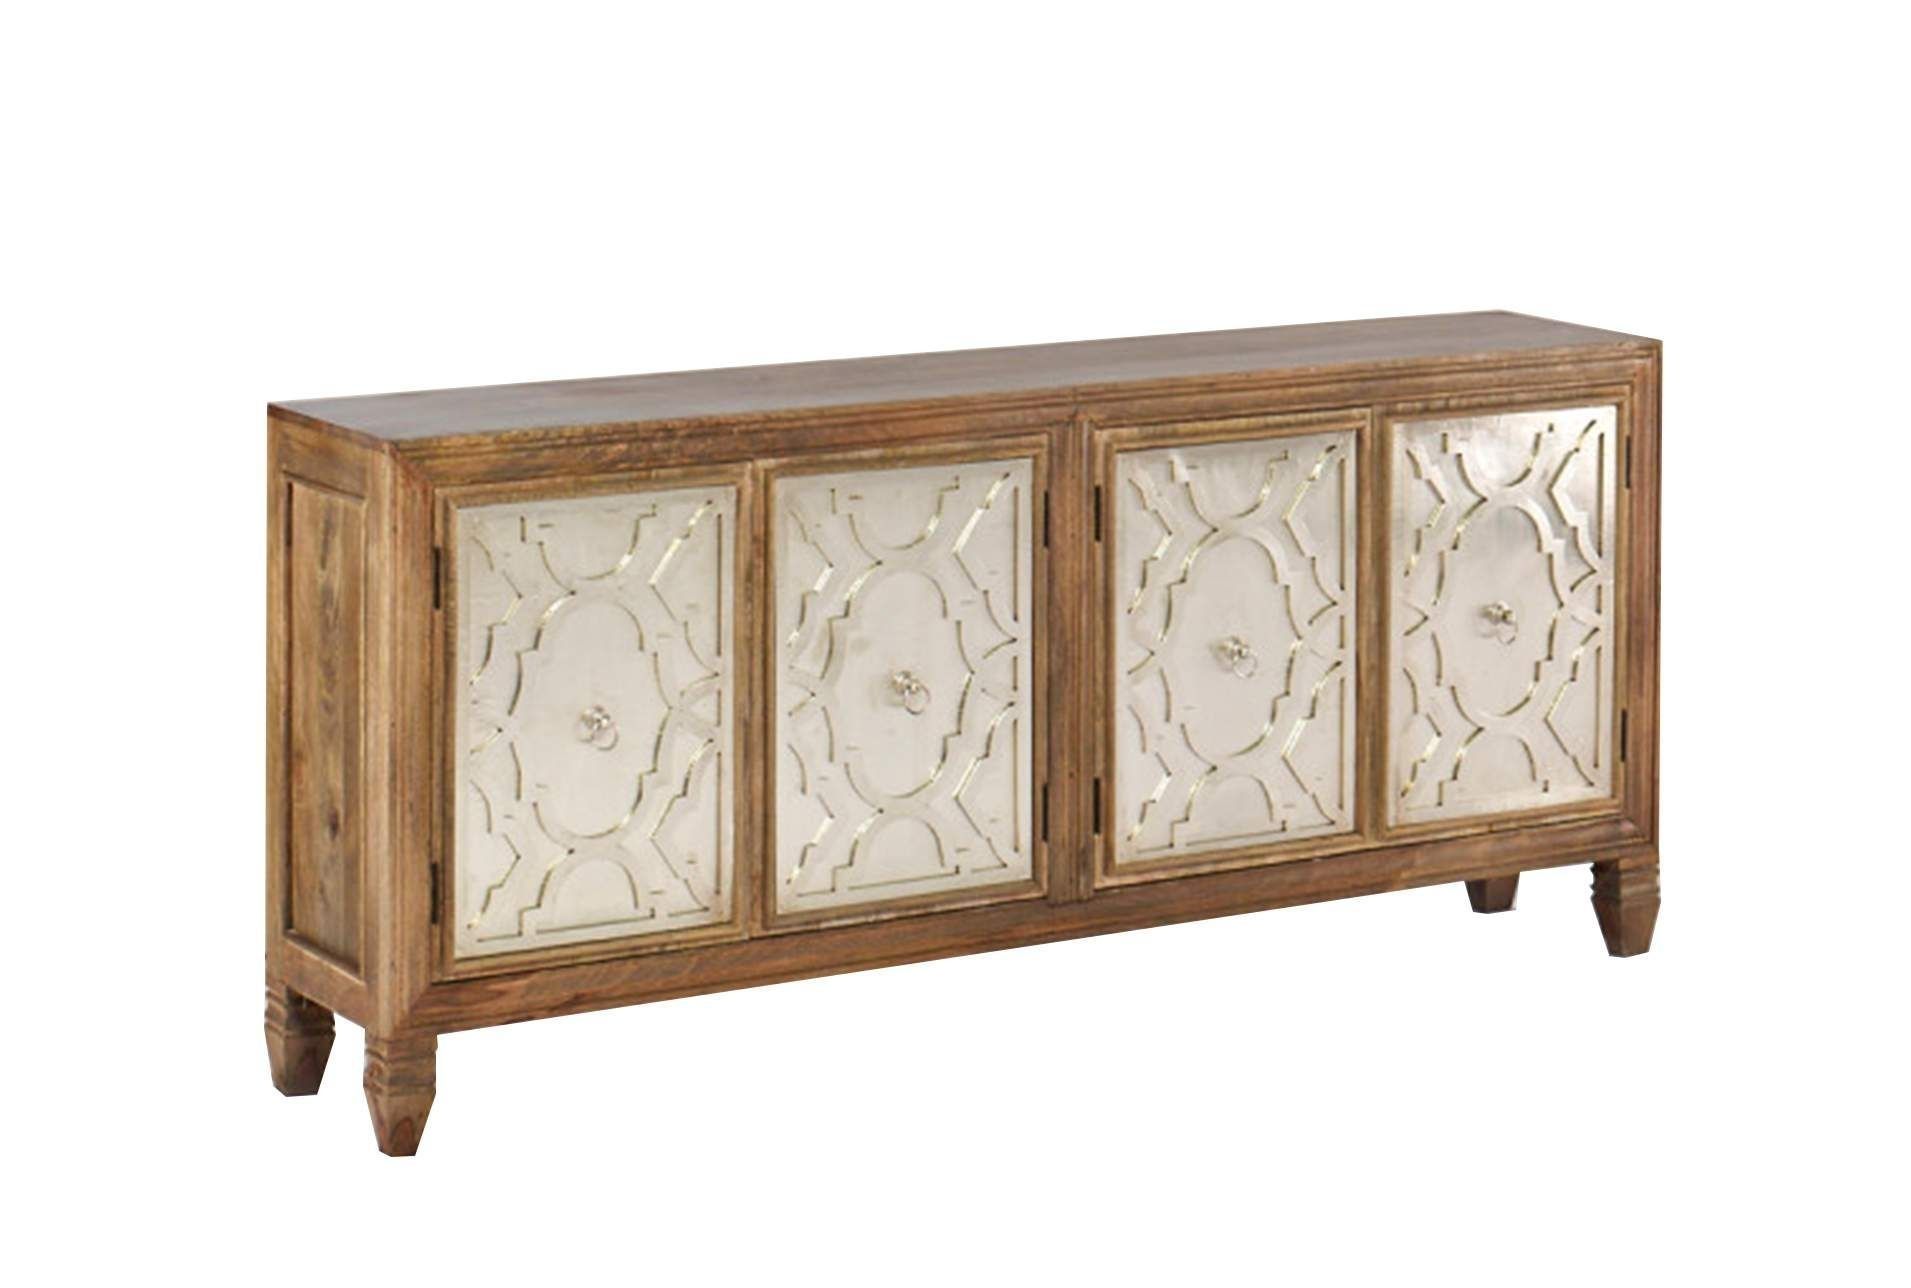 Jigsaw Refinement Sideboard | Products Throughout Ironwood 4 Door Sideboards (View 1 of 30)